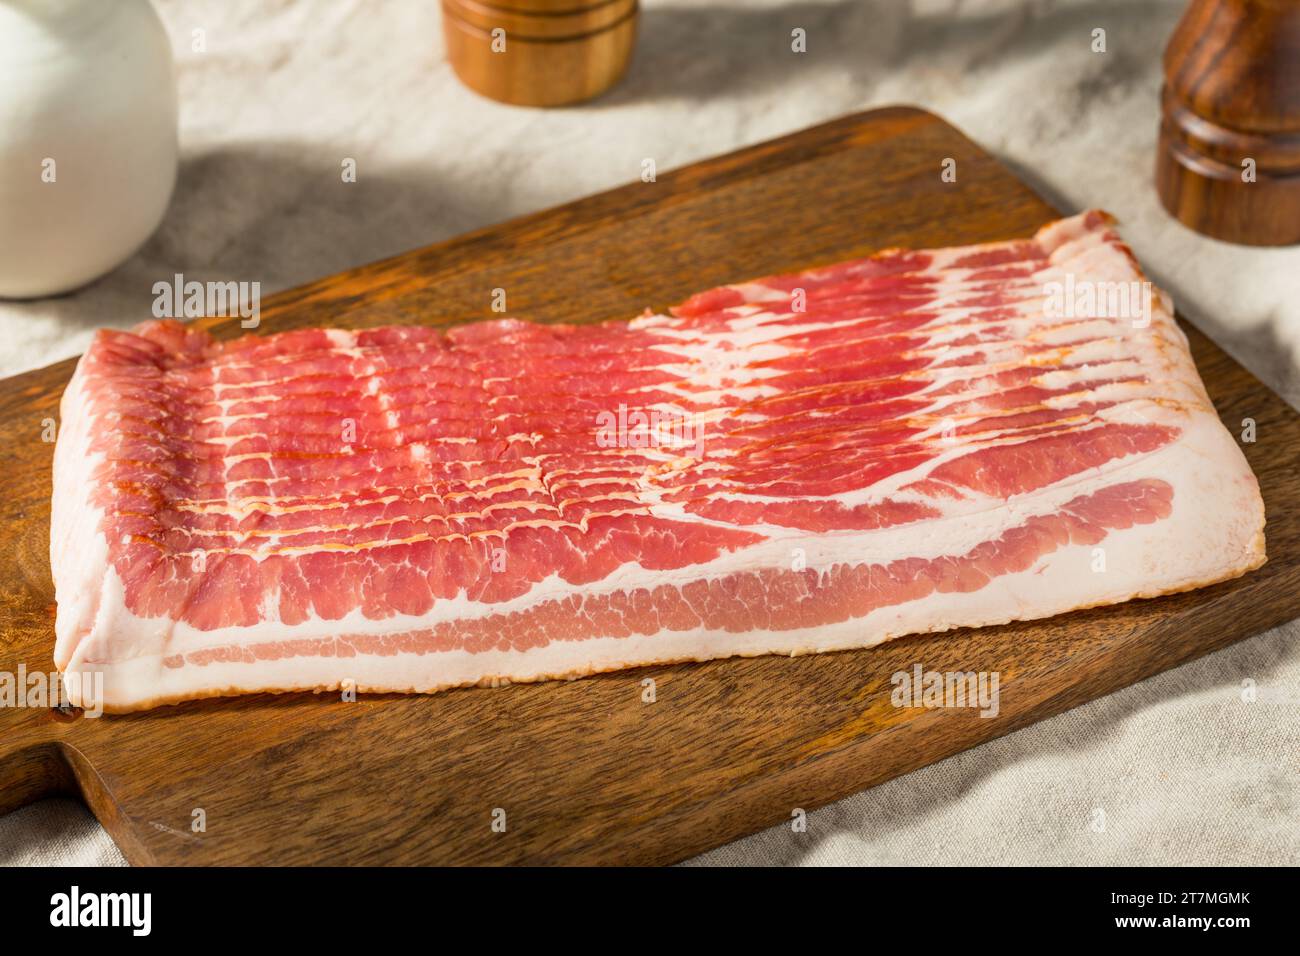 Red Organic Raw Bacon Cut into Slices Foto Stock